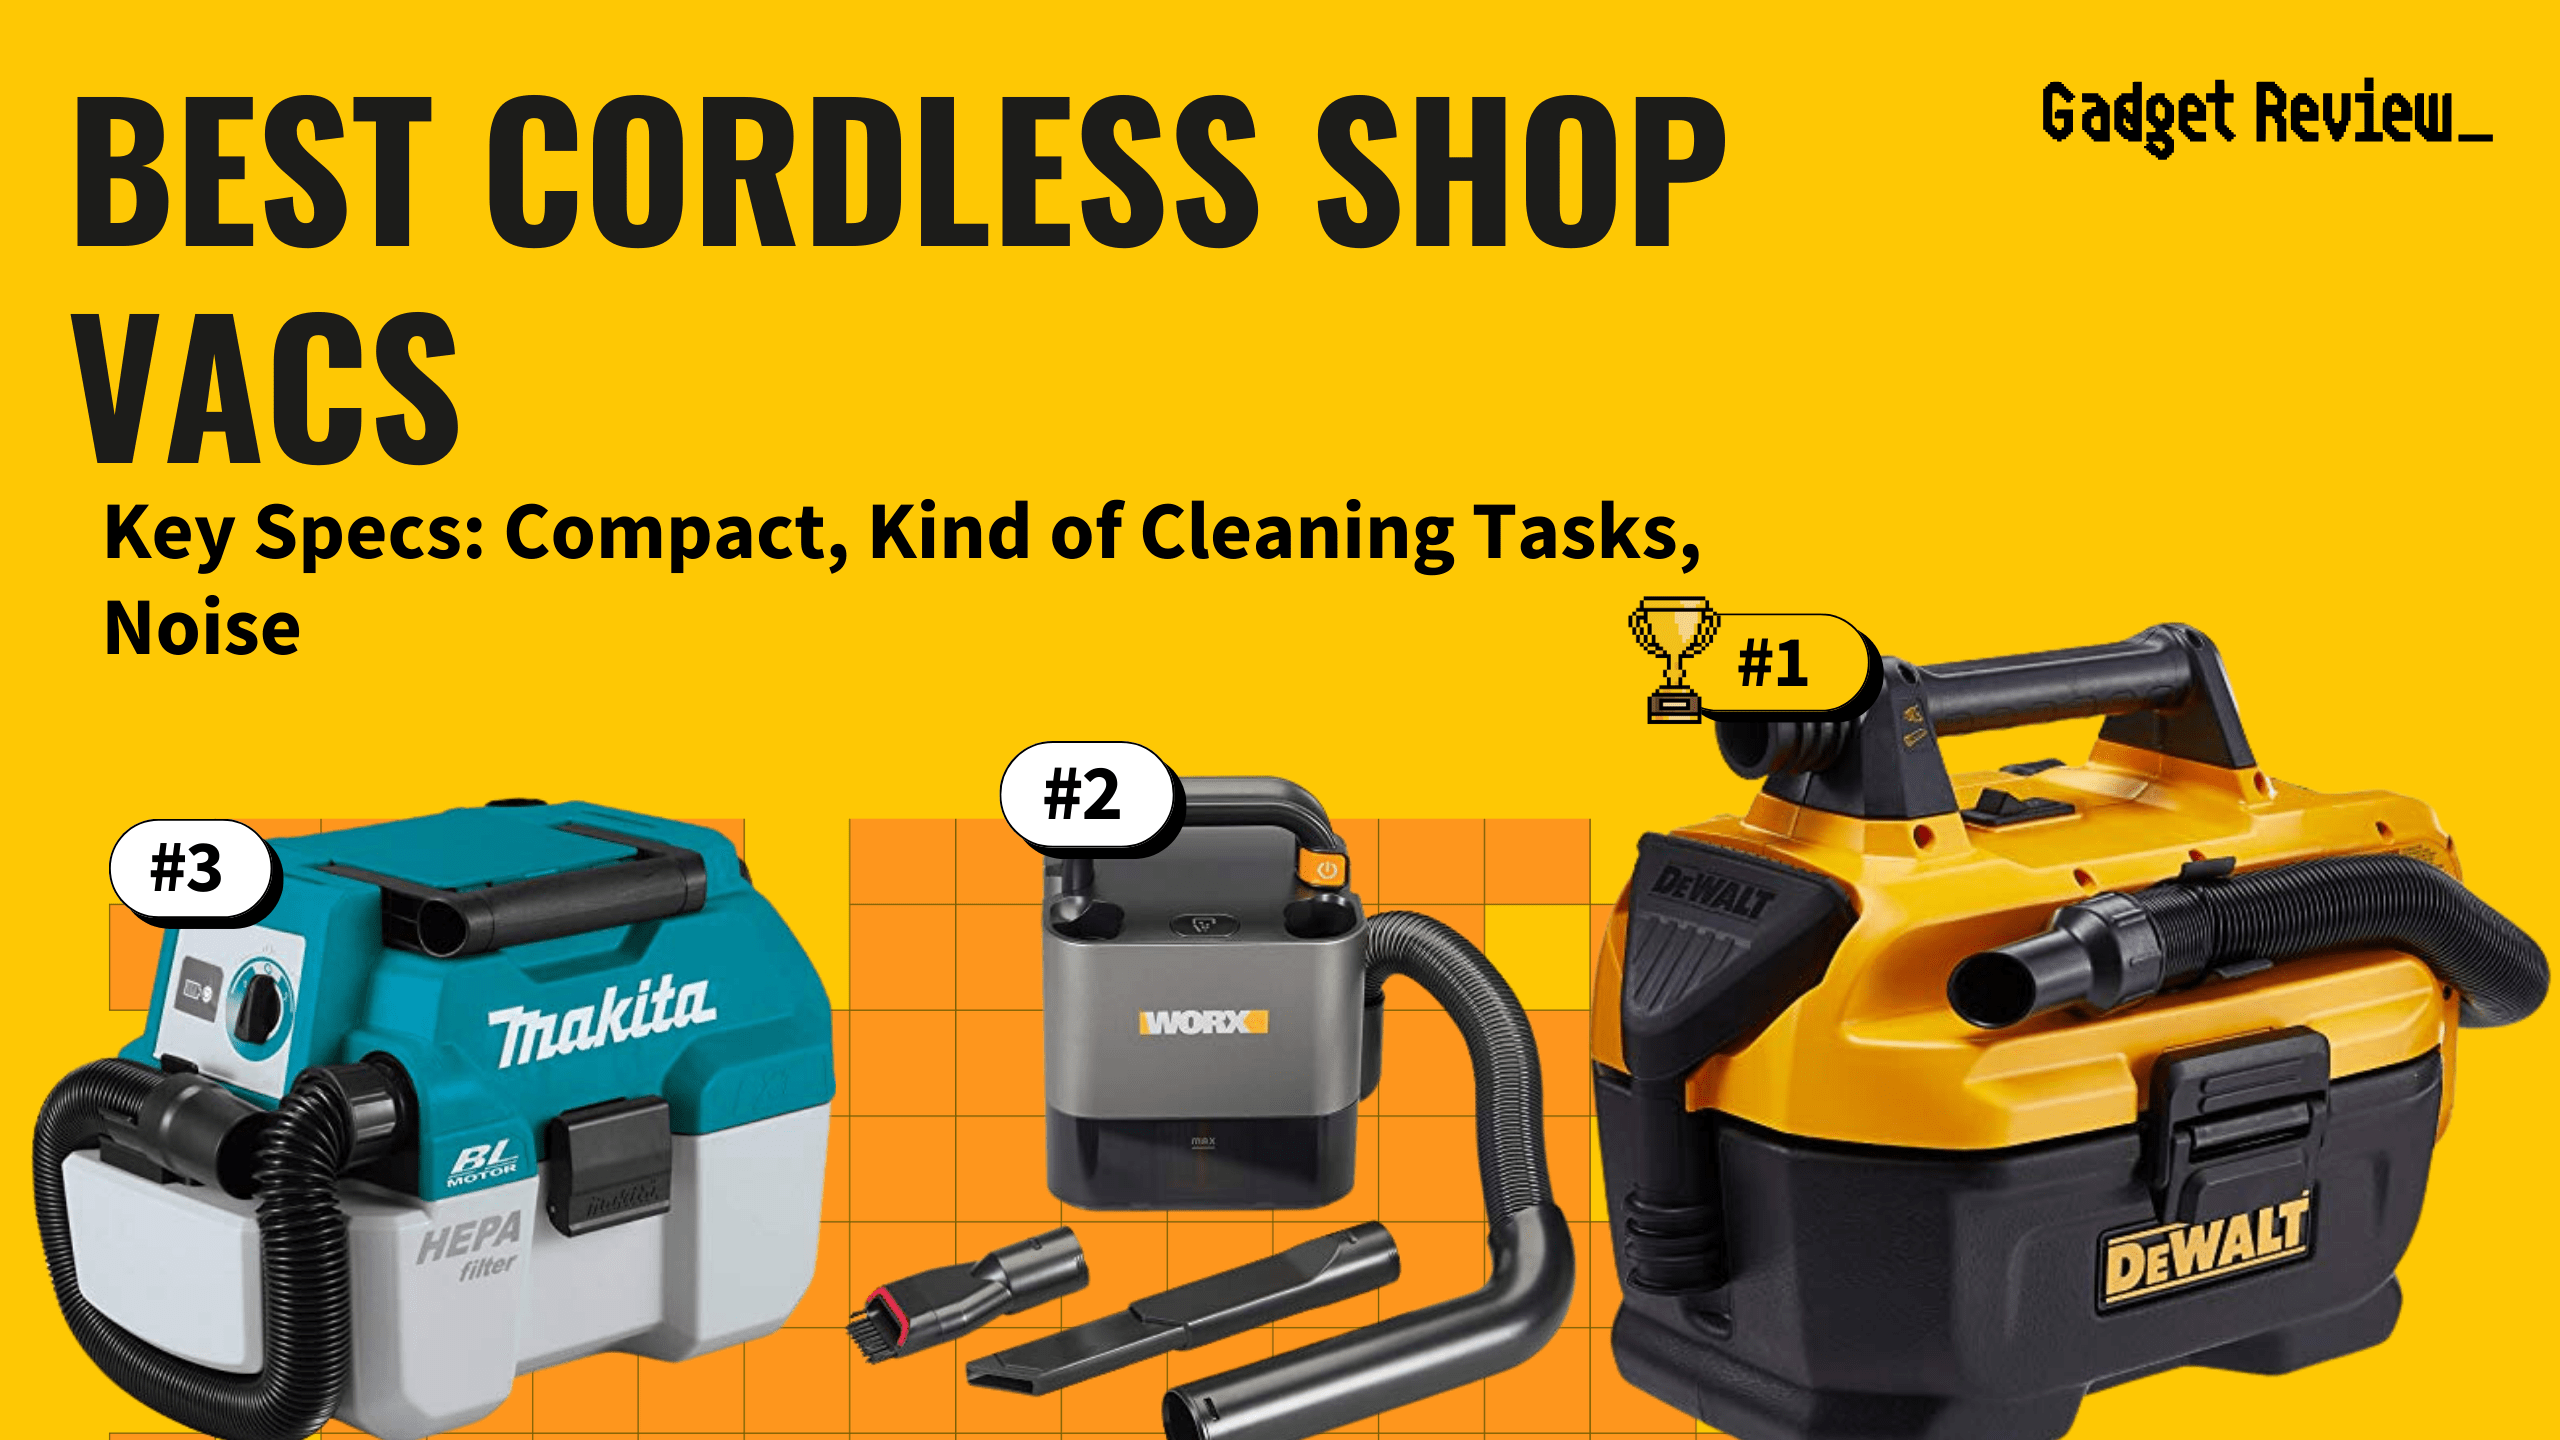 best cordless shop vac featured image that shows the top three best vacuum cleaner models